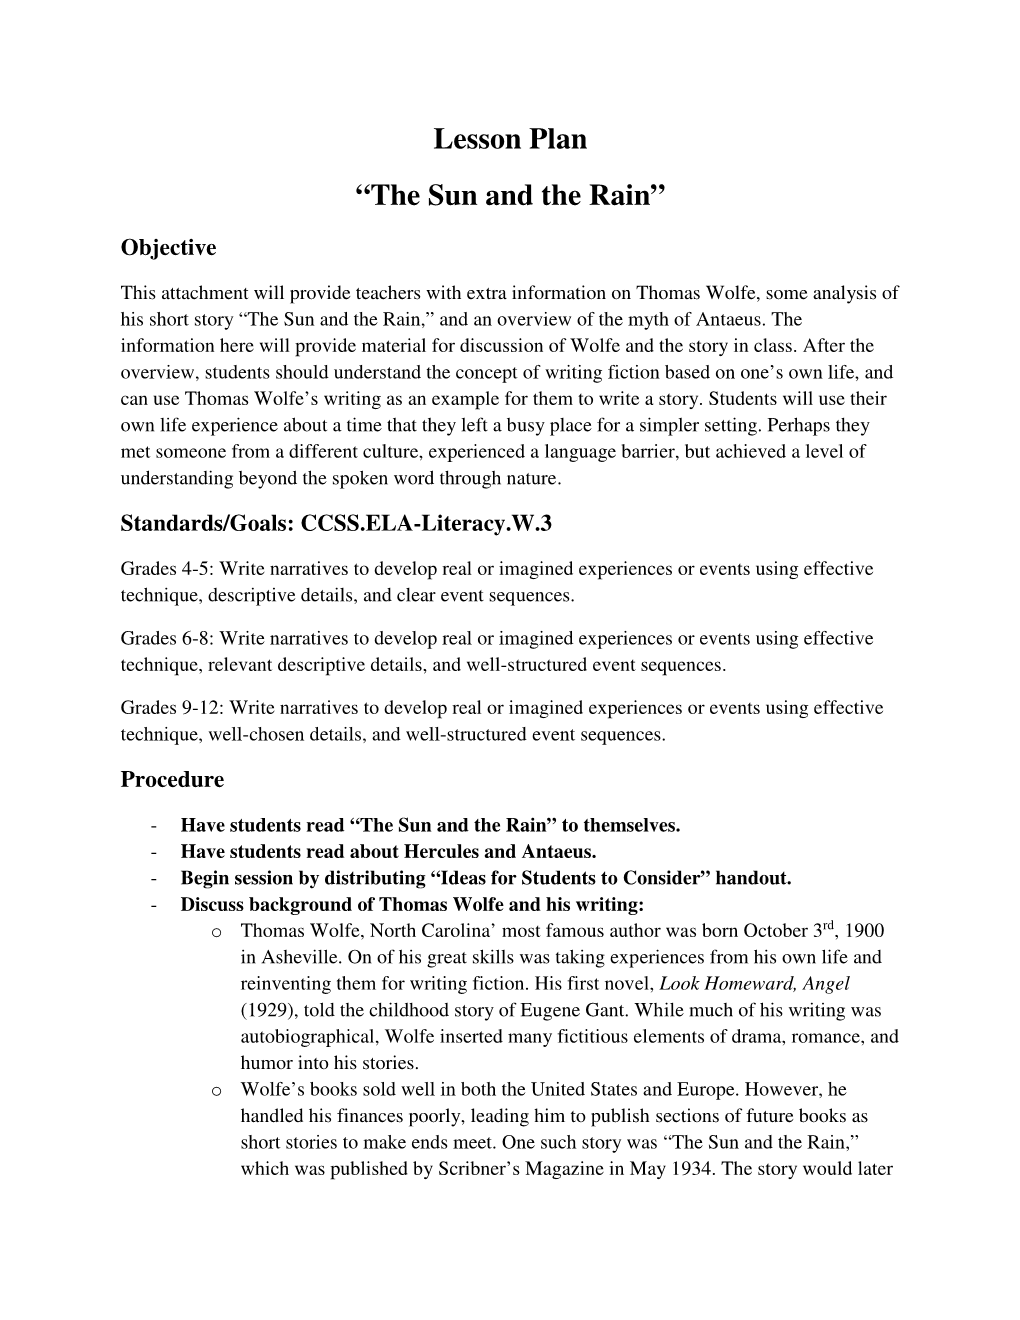 Lesson Plan “The Sun and the Rain”